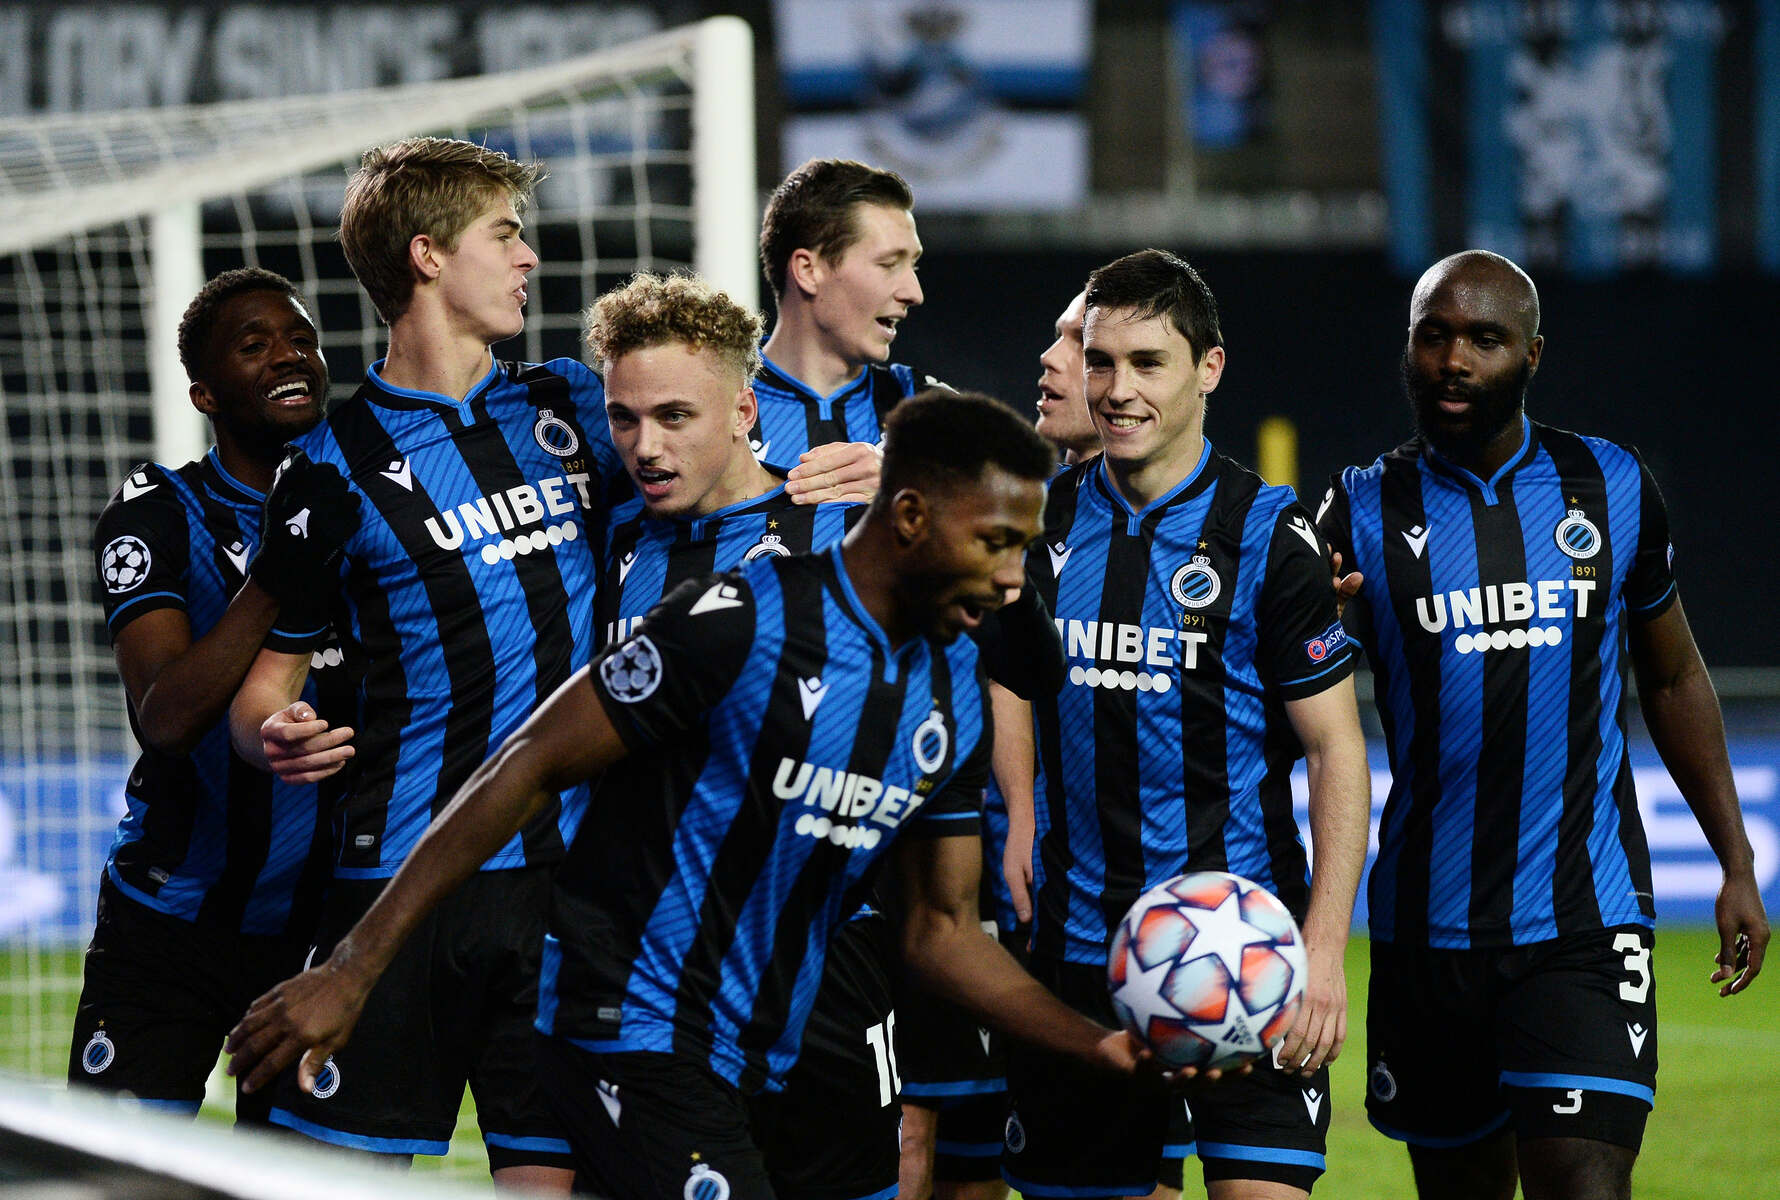 Club Brugge History- All About the Club - Footbalium